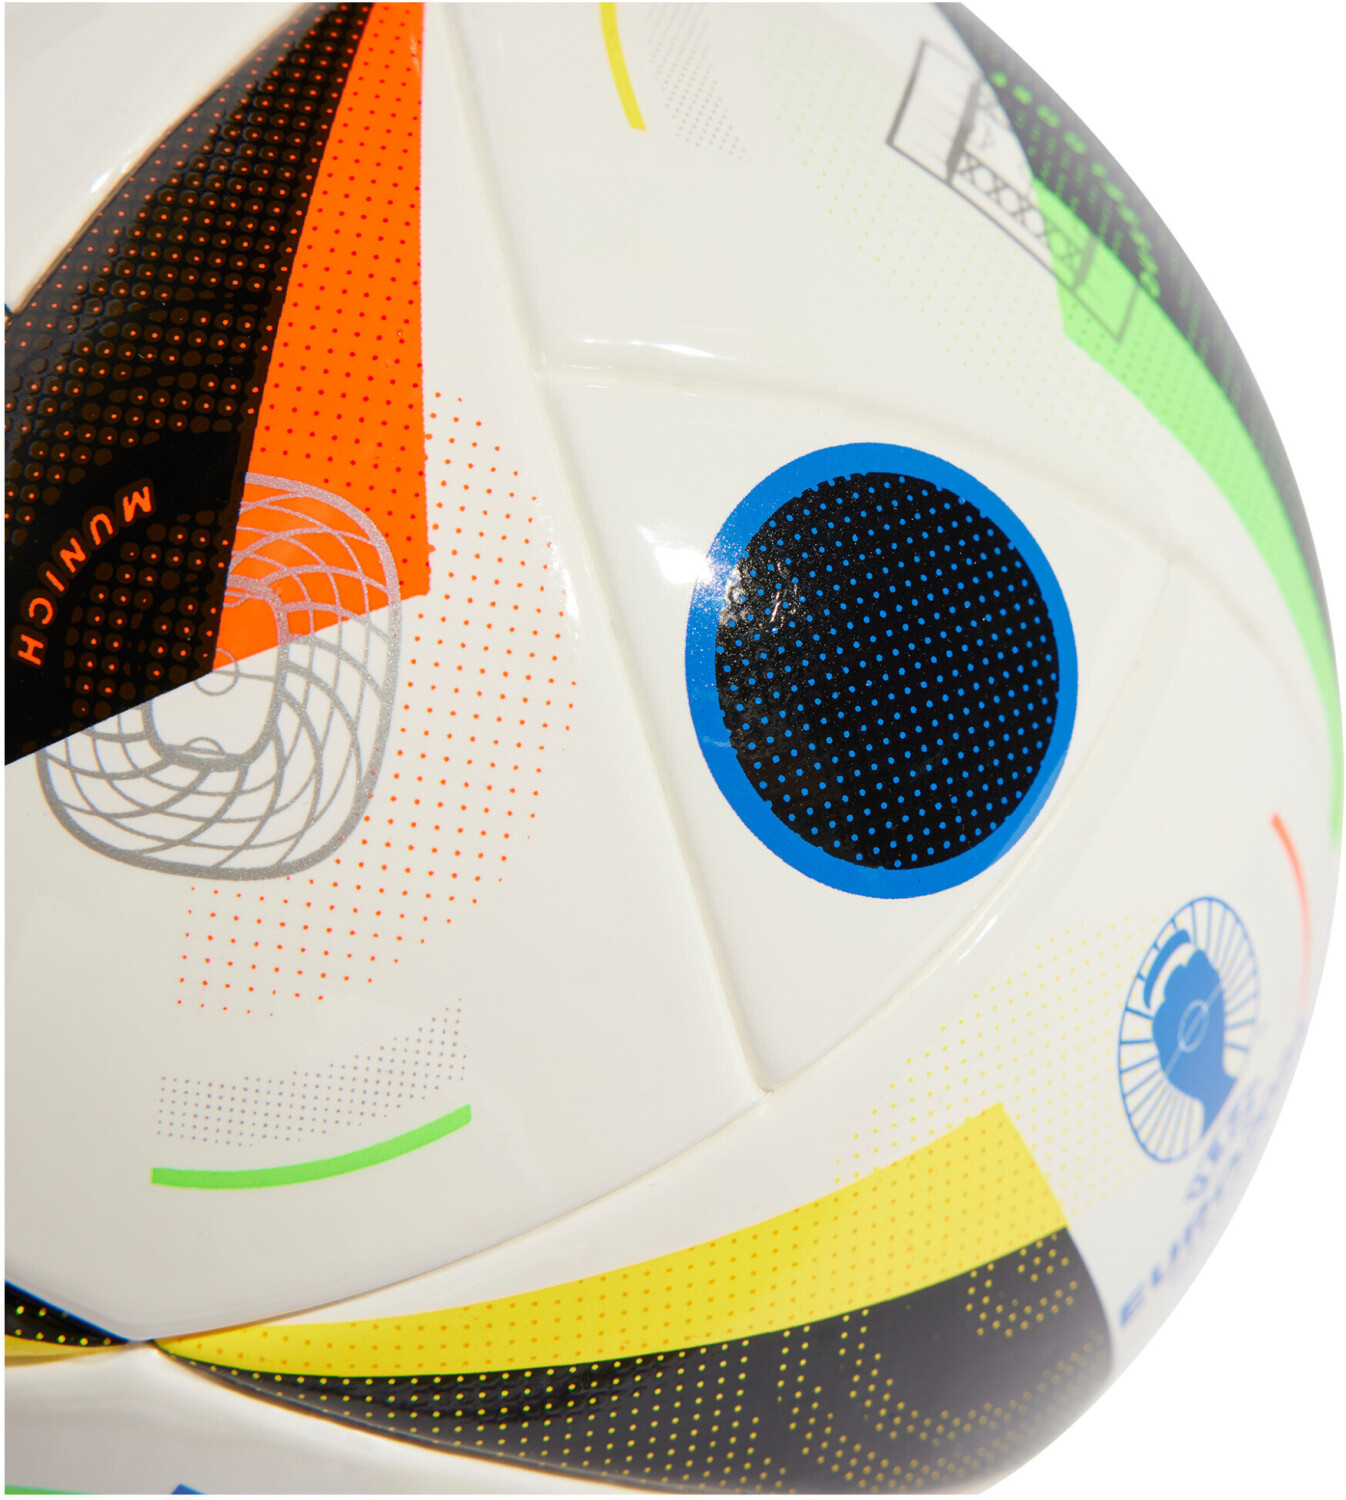 Buy Adidas Fußballliebe Deals (EURO24) Mini £10.99 – (Today) Best from on